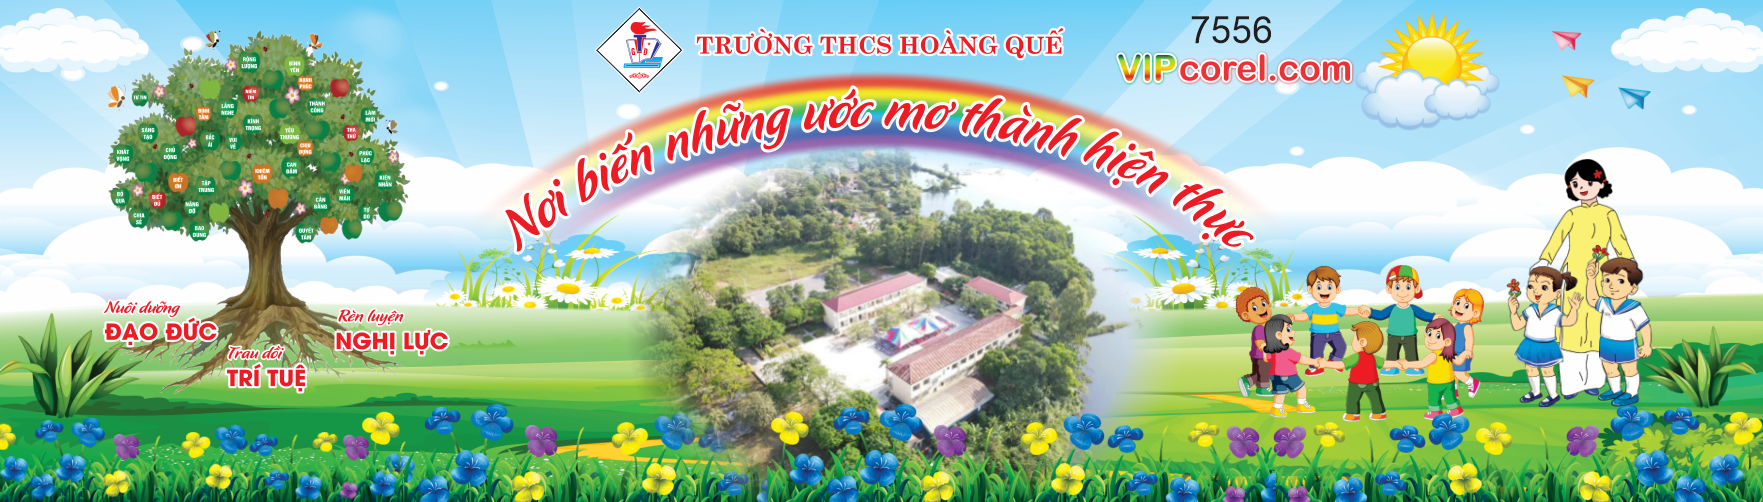 tranh tuong truong thcs - cay tri tue - noi bien nhung uoc mo thanh hien thuc.png